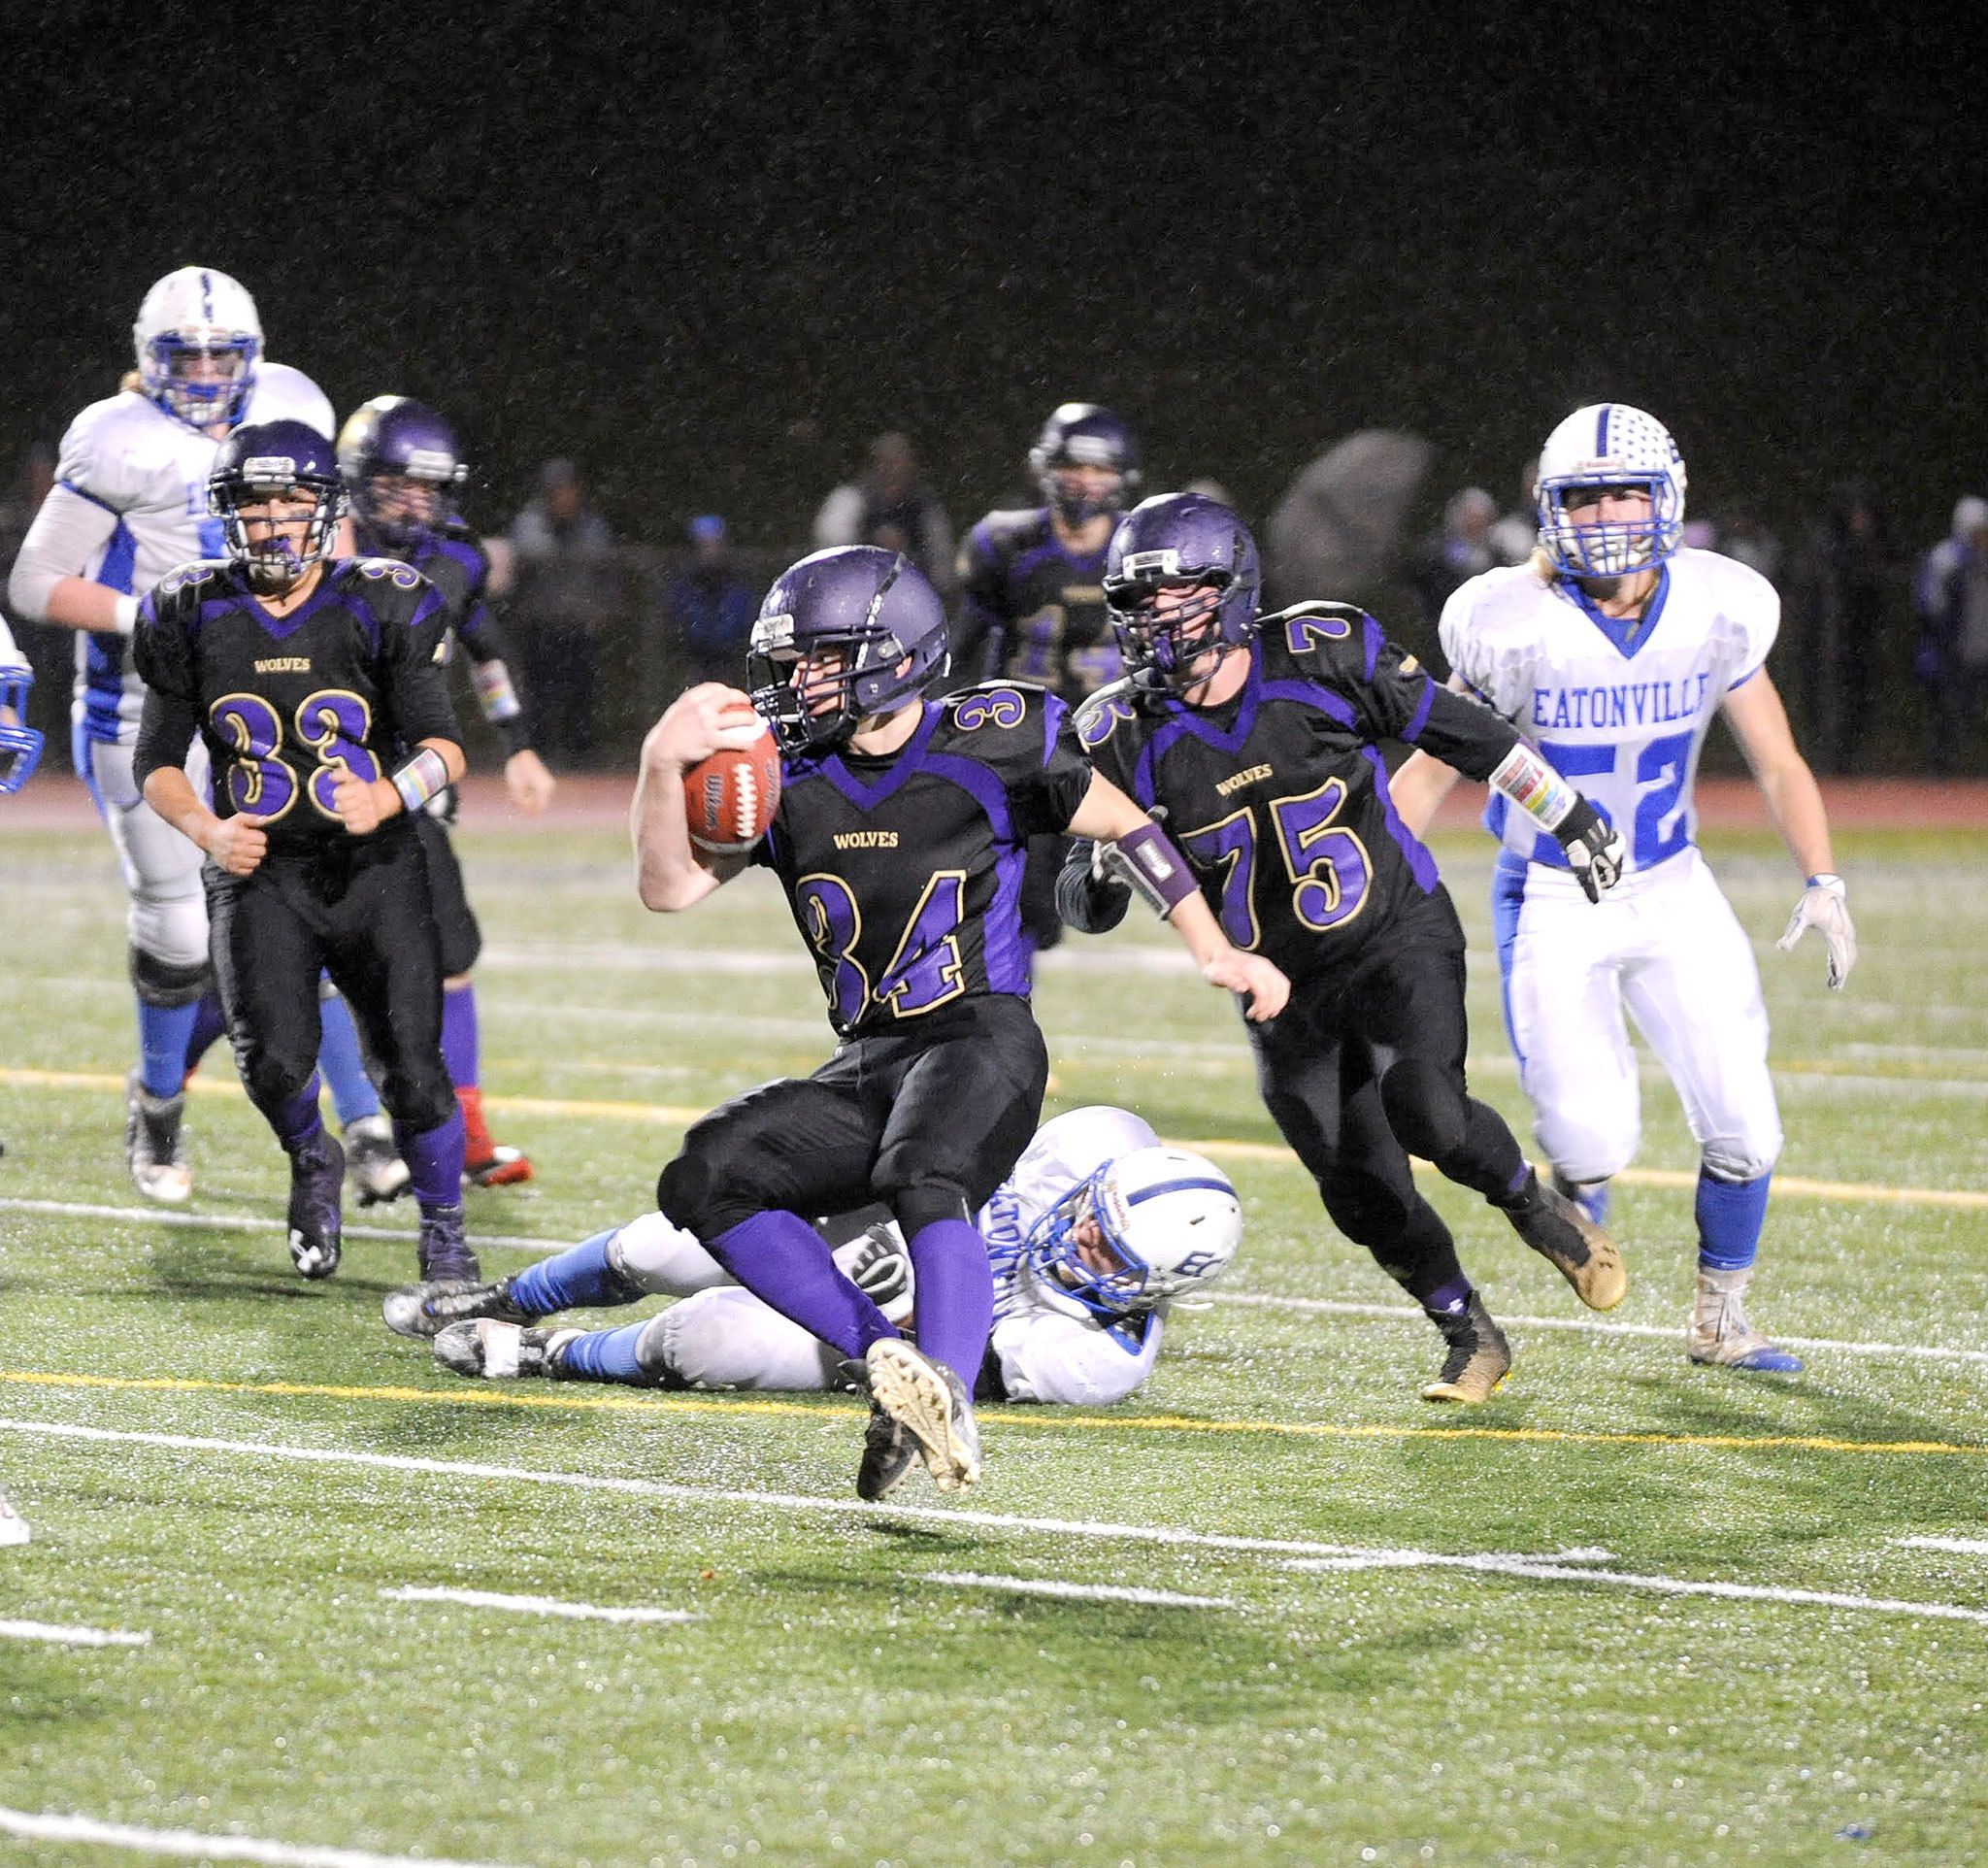 Michael Dashiell/Olympic Peninsula News Group Sequim’s Tyler Conn (34) runs against Eatonville with teammates Brenden Lauritzen (75) and Rudy Whitehad (33) blocking. Eatonville won the 2A District playoff shootout by a score of 59-42.